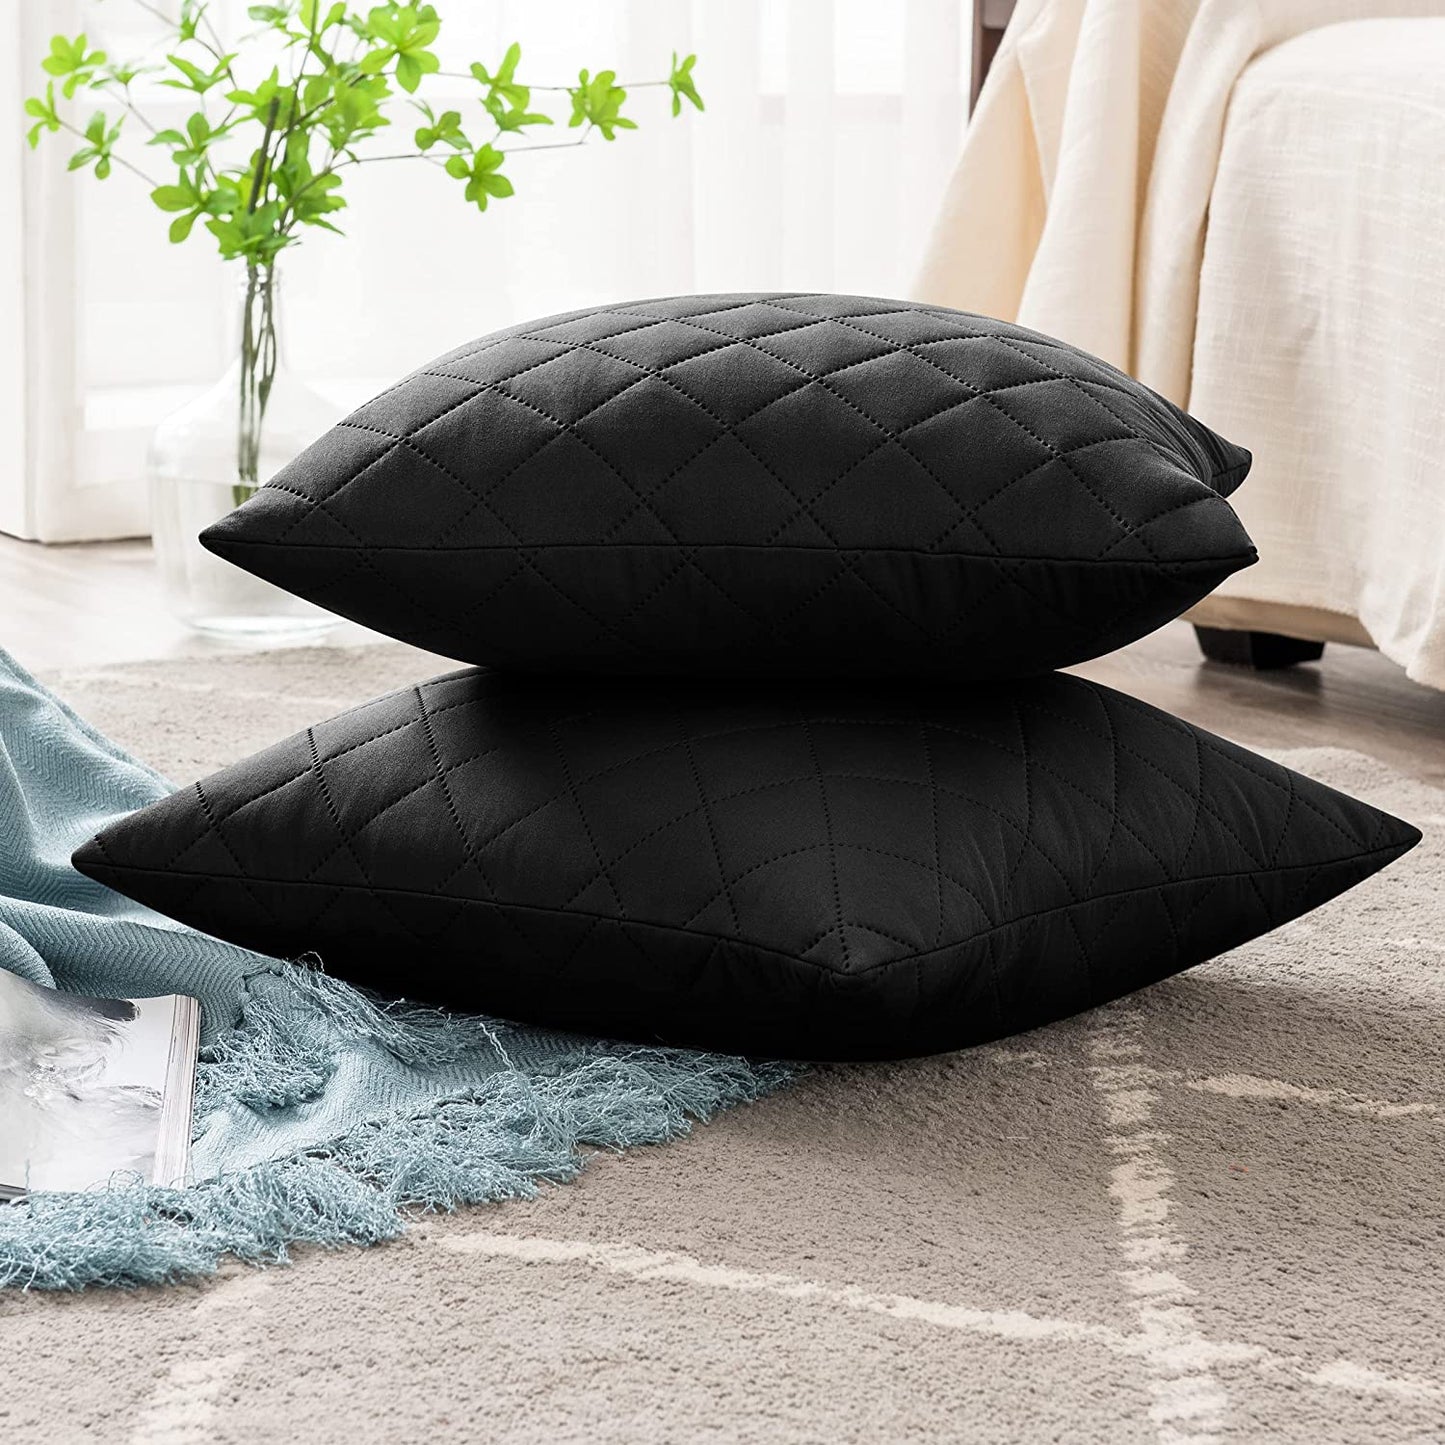 Quilted Cushion Cover Square Pattren 16"x16"Black